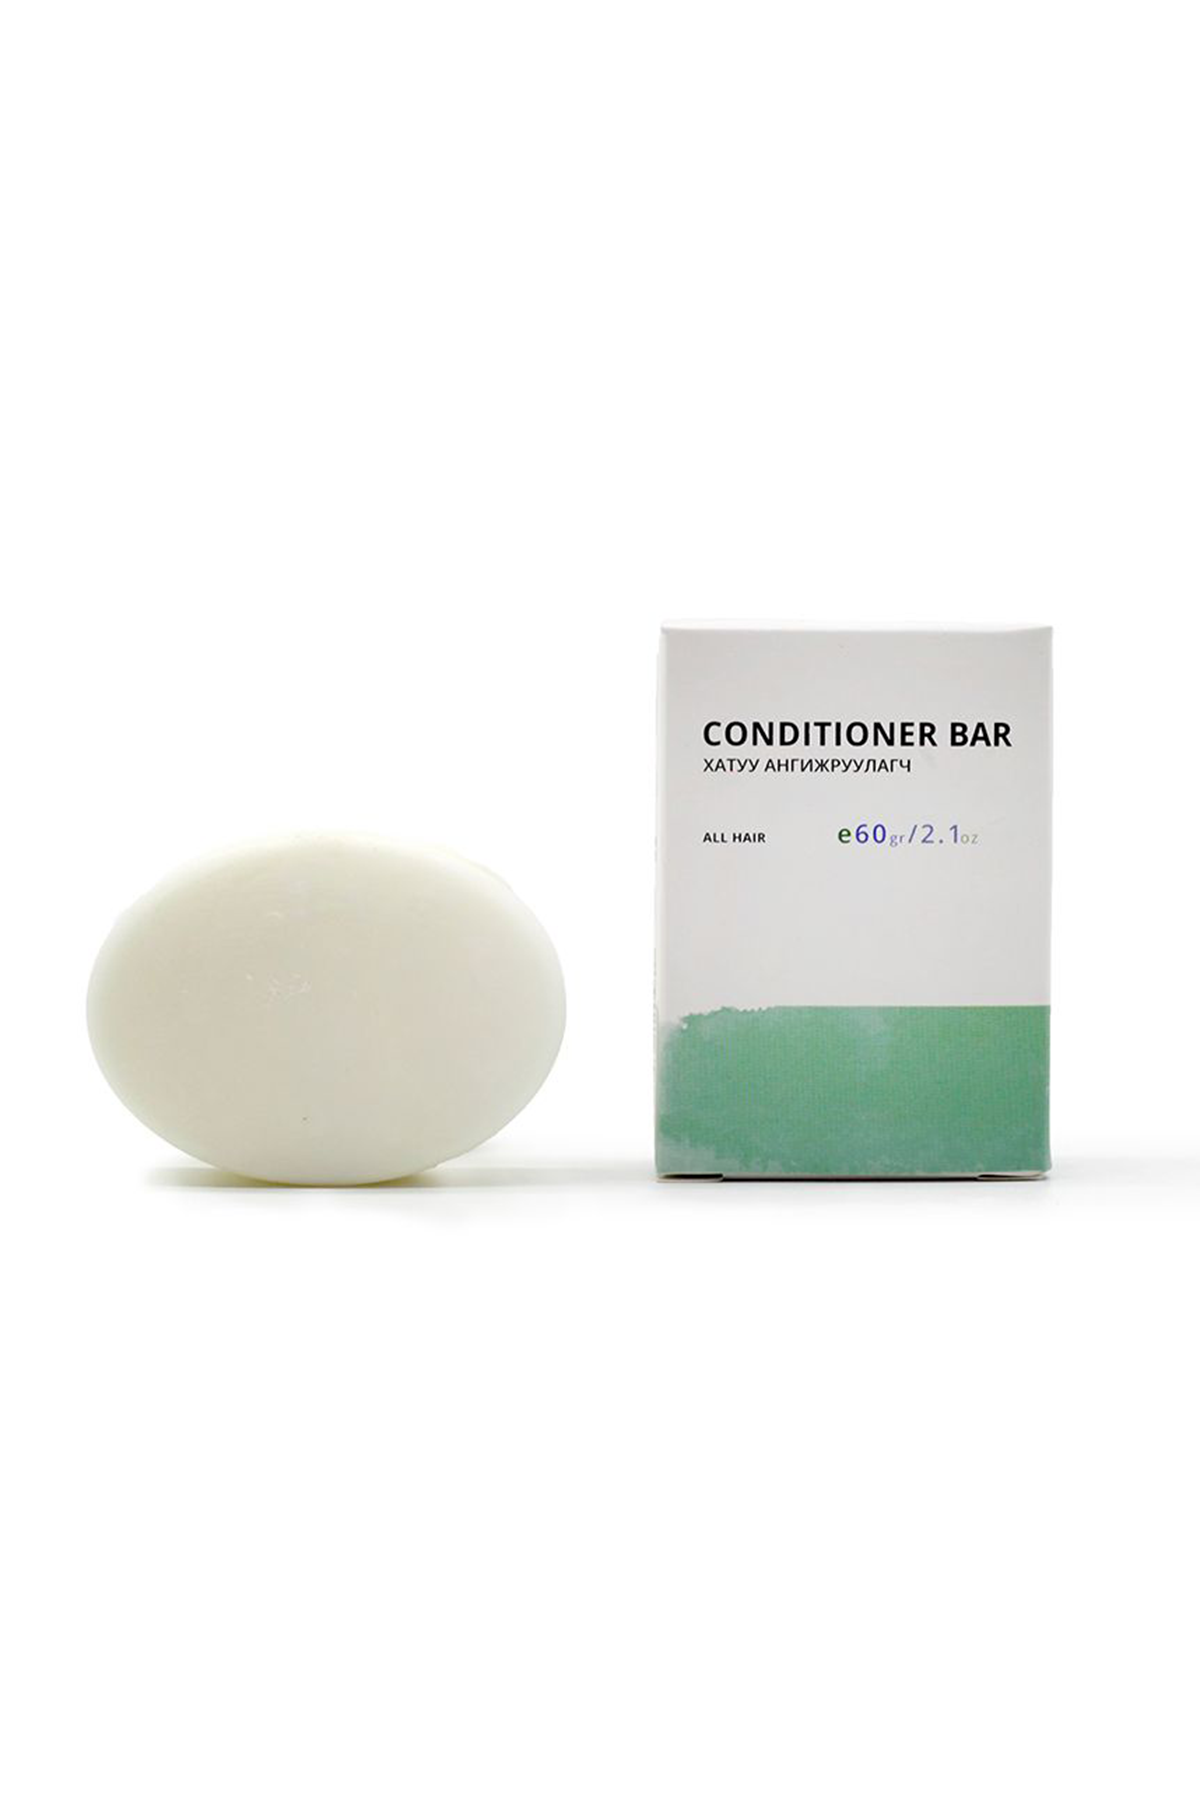 Handmade conditioner bar made with organic ingredients